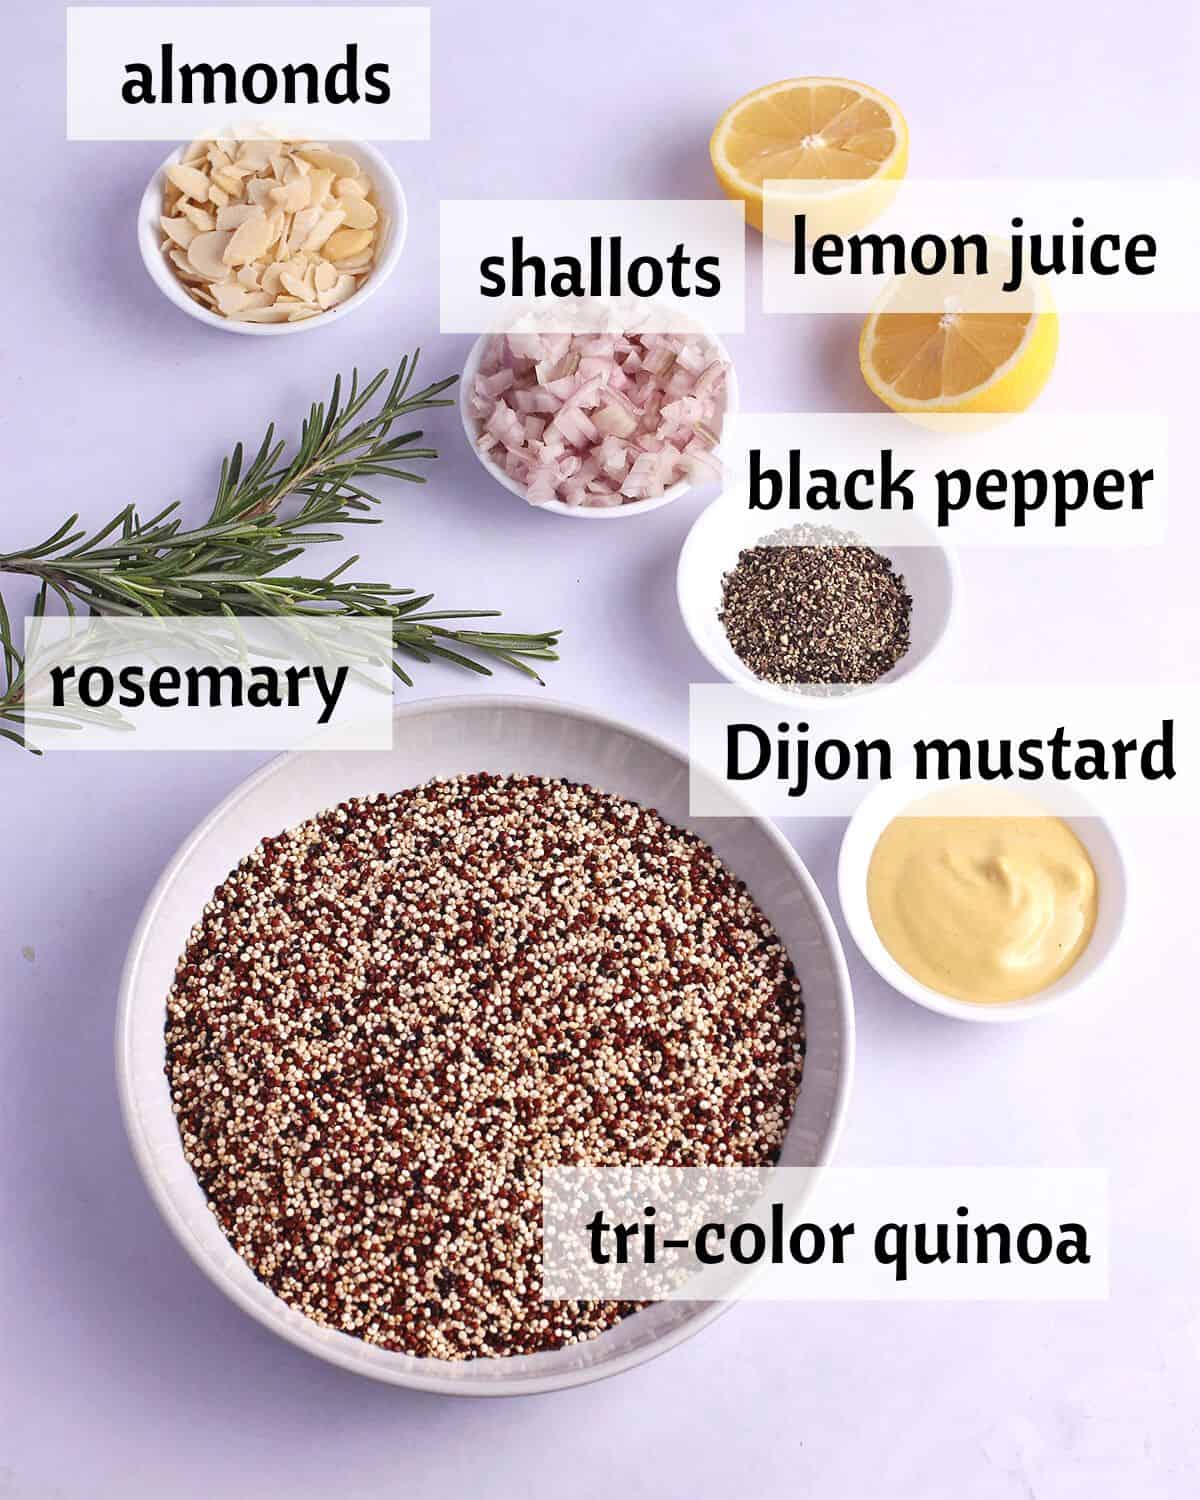 The ingredients for tri-color quinoa with labels.